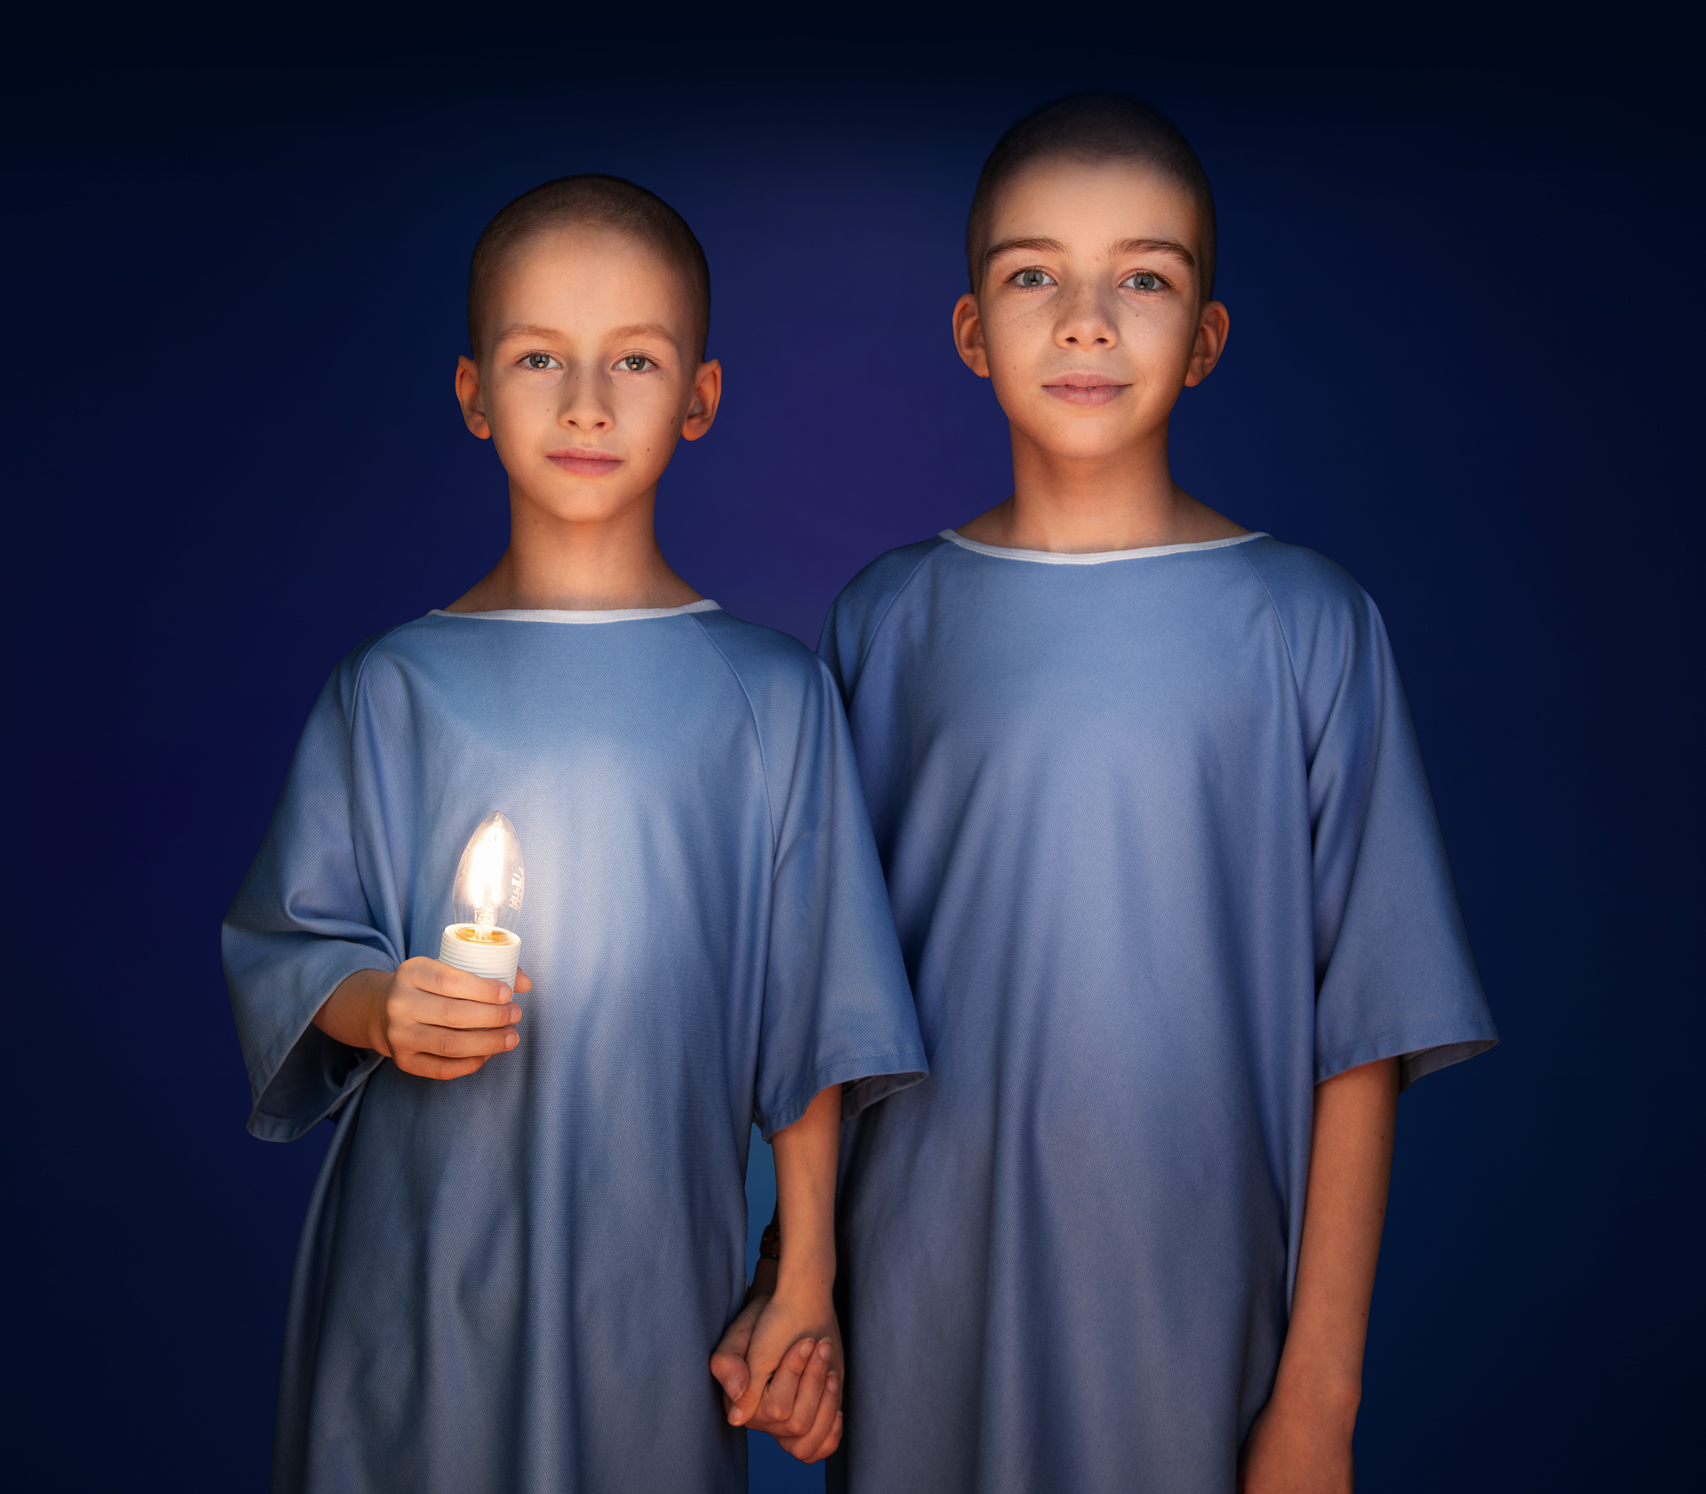 Siblings Jules and Lou, both wearing blue hospital gowns, stand side by side, smiling and holding hands. Jules has a glowing candle-shaped light in his other hand.